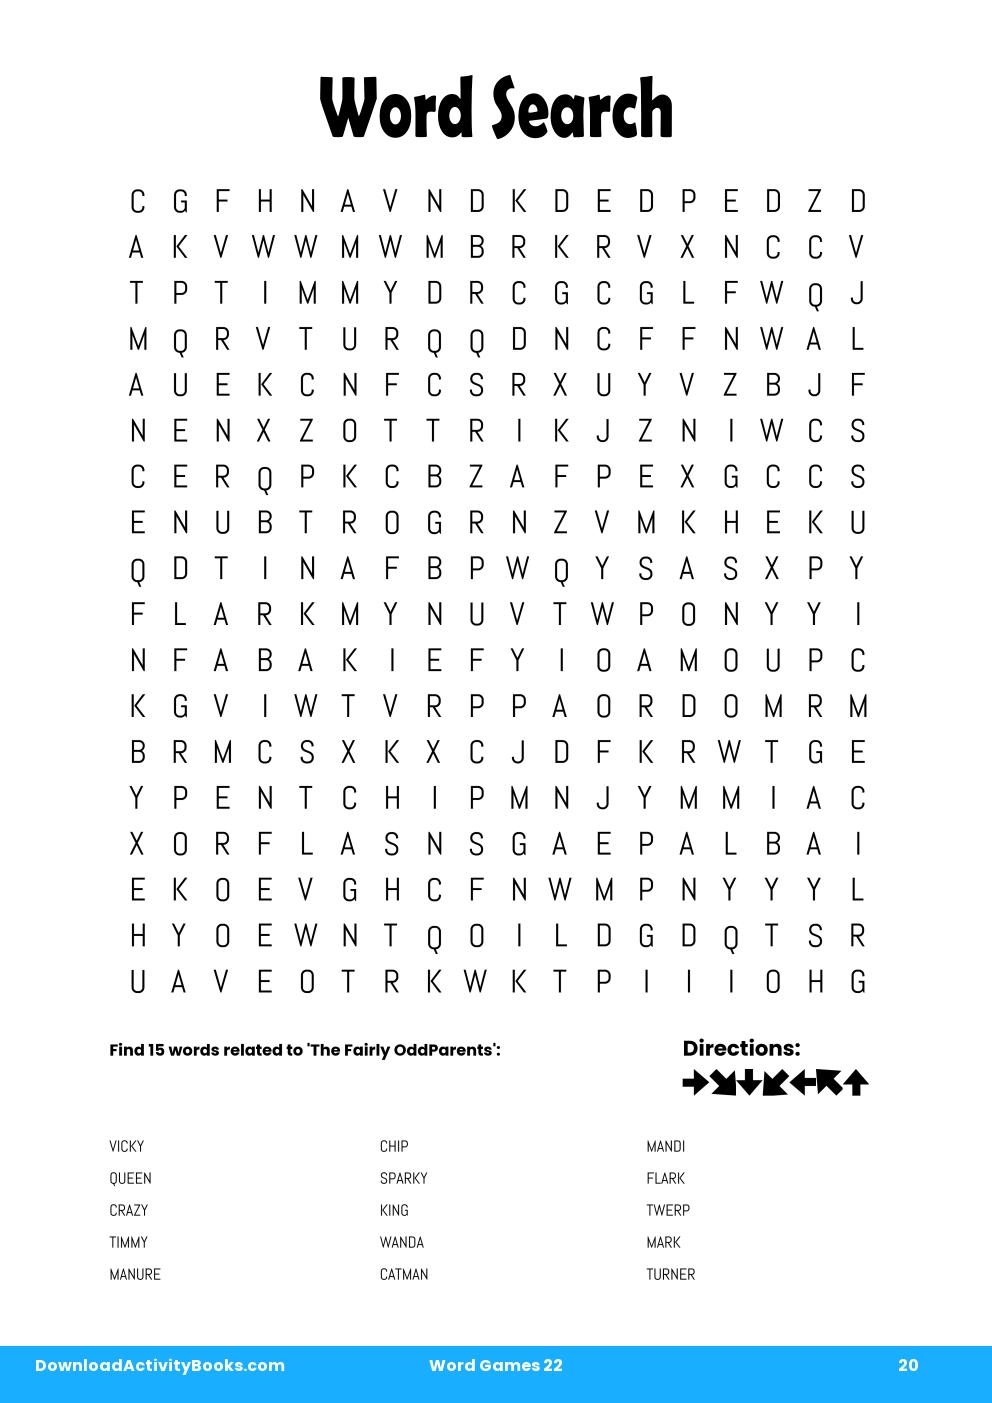 word-search-in-word-games-28